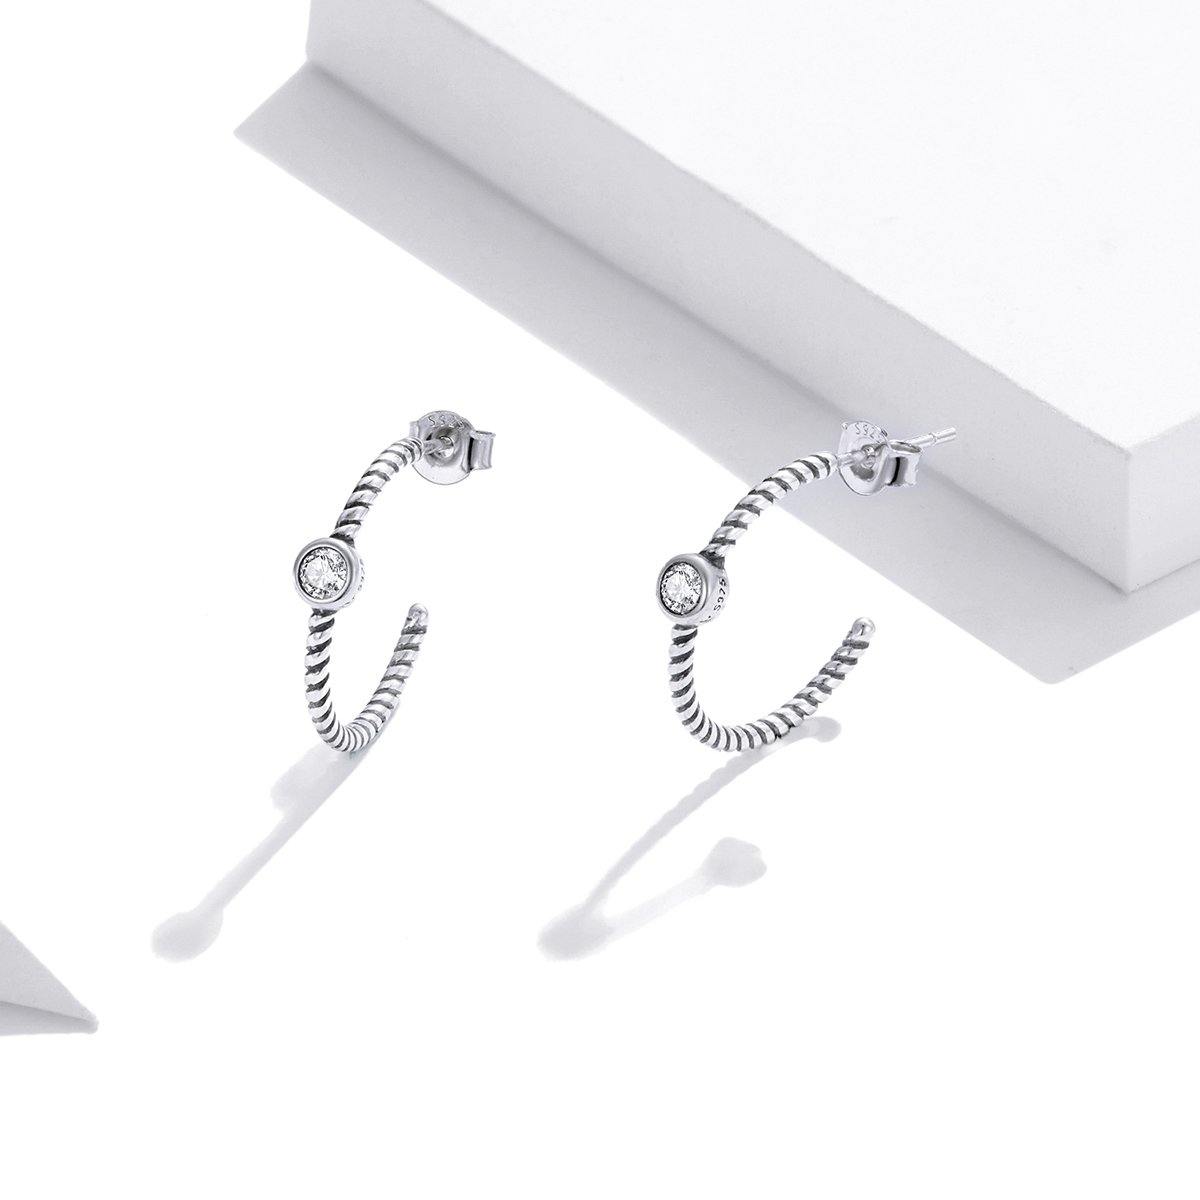 Twisted Lines 925 Sterling Silver Earrings - Aisllin Jewelry